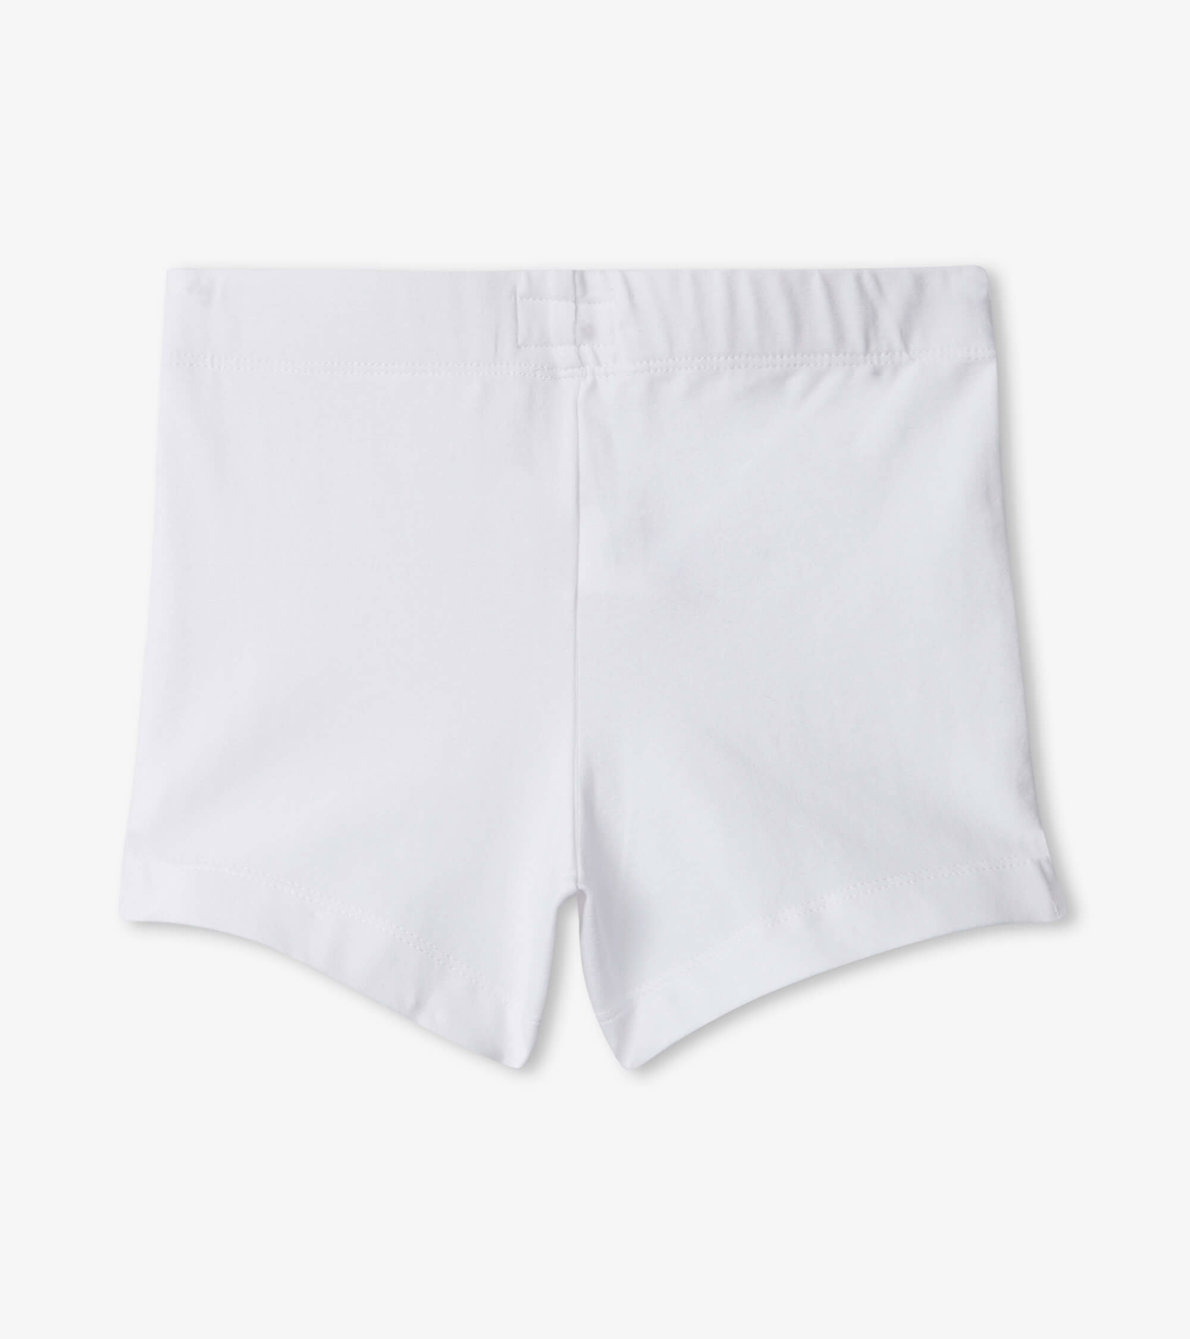 View larger image of Girls White Summer Shorts